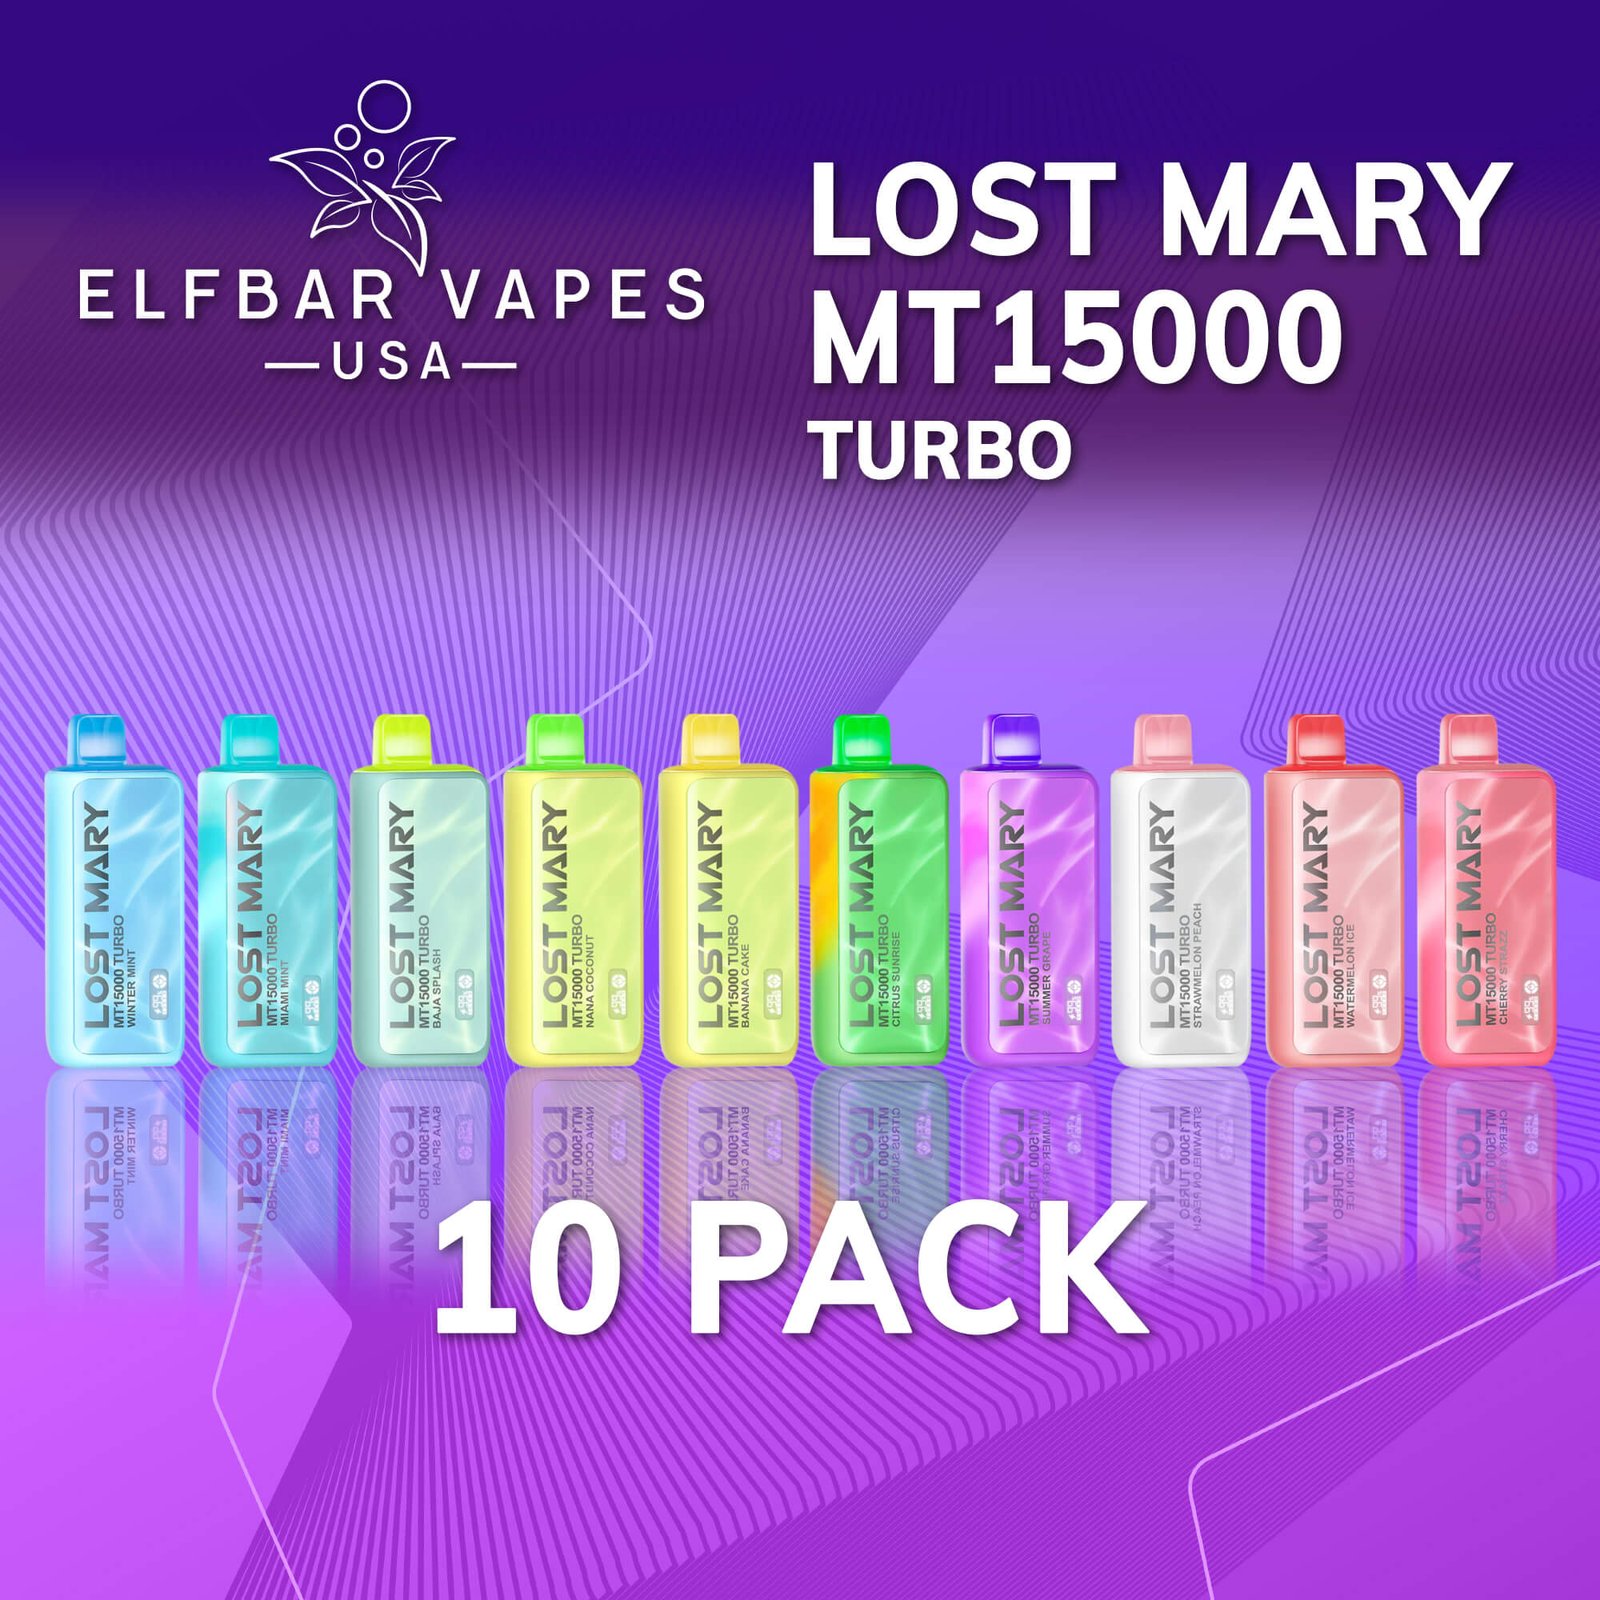 Lost Mary MT15000 TURBO disposable vape 10 pack